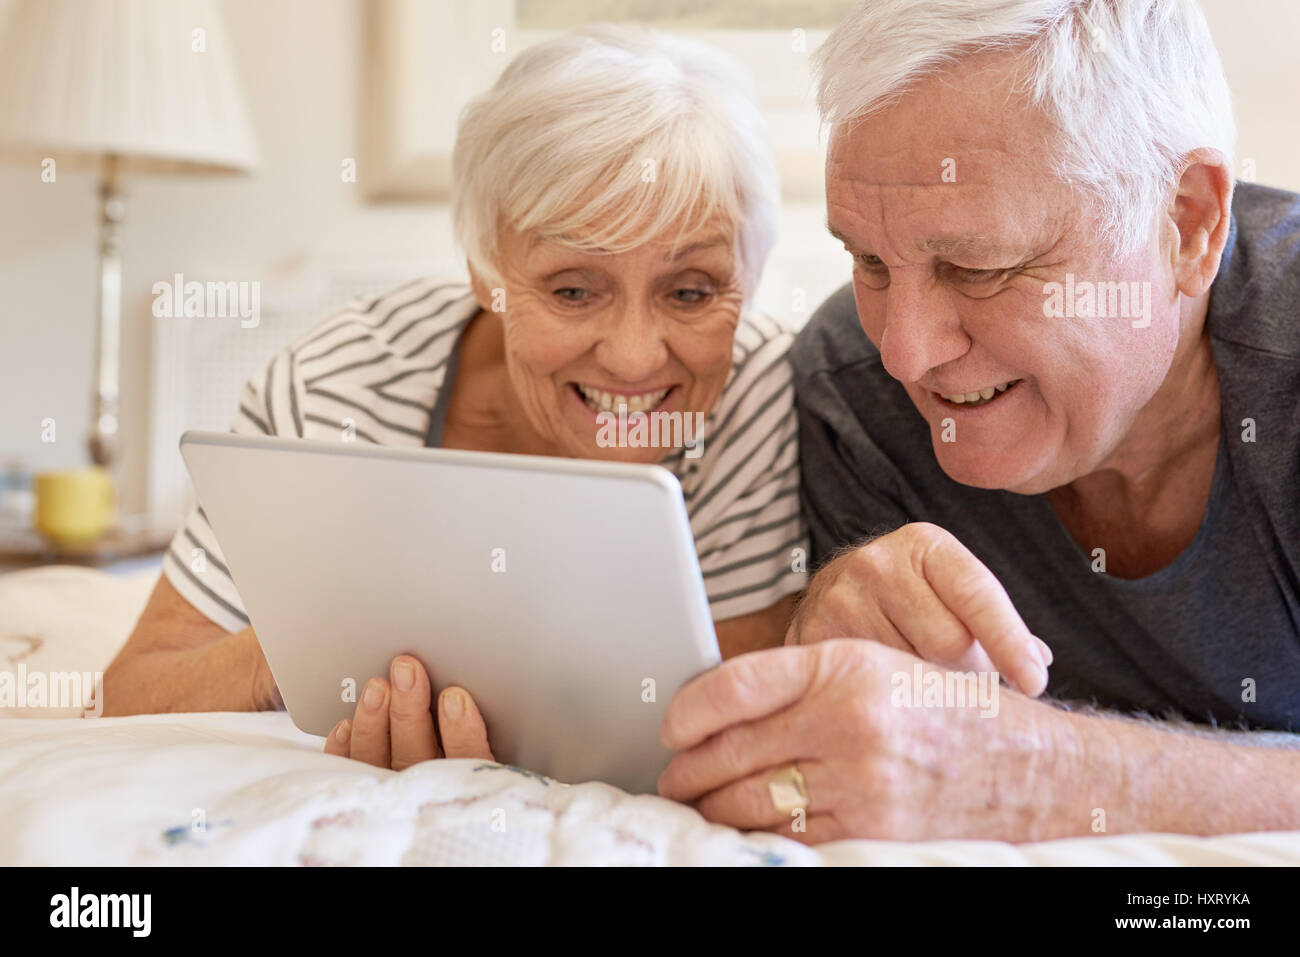 Smiling senior couple using a digital tablet together in bed Stock Photo